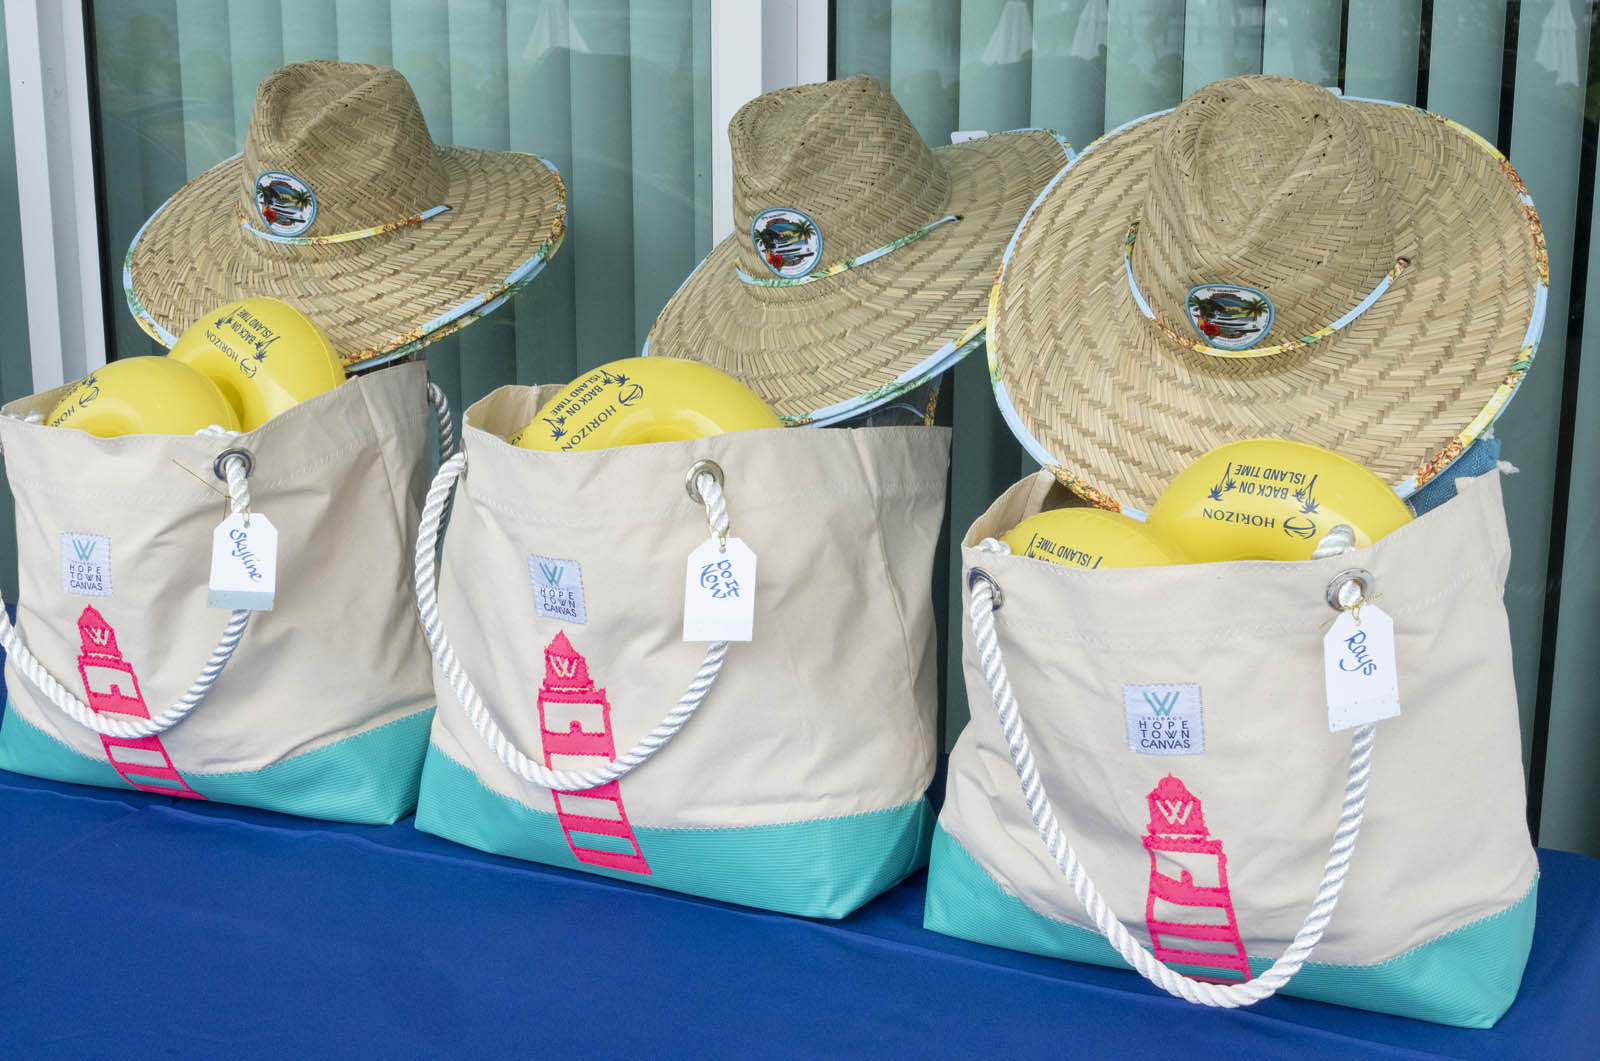 Horizon Yachts Rendezvous welcome gift bags.